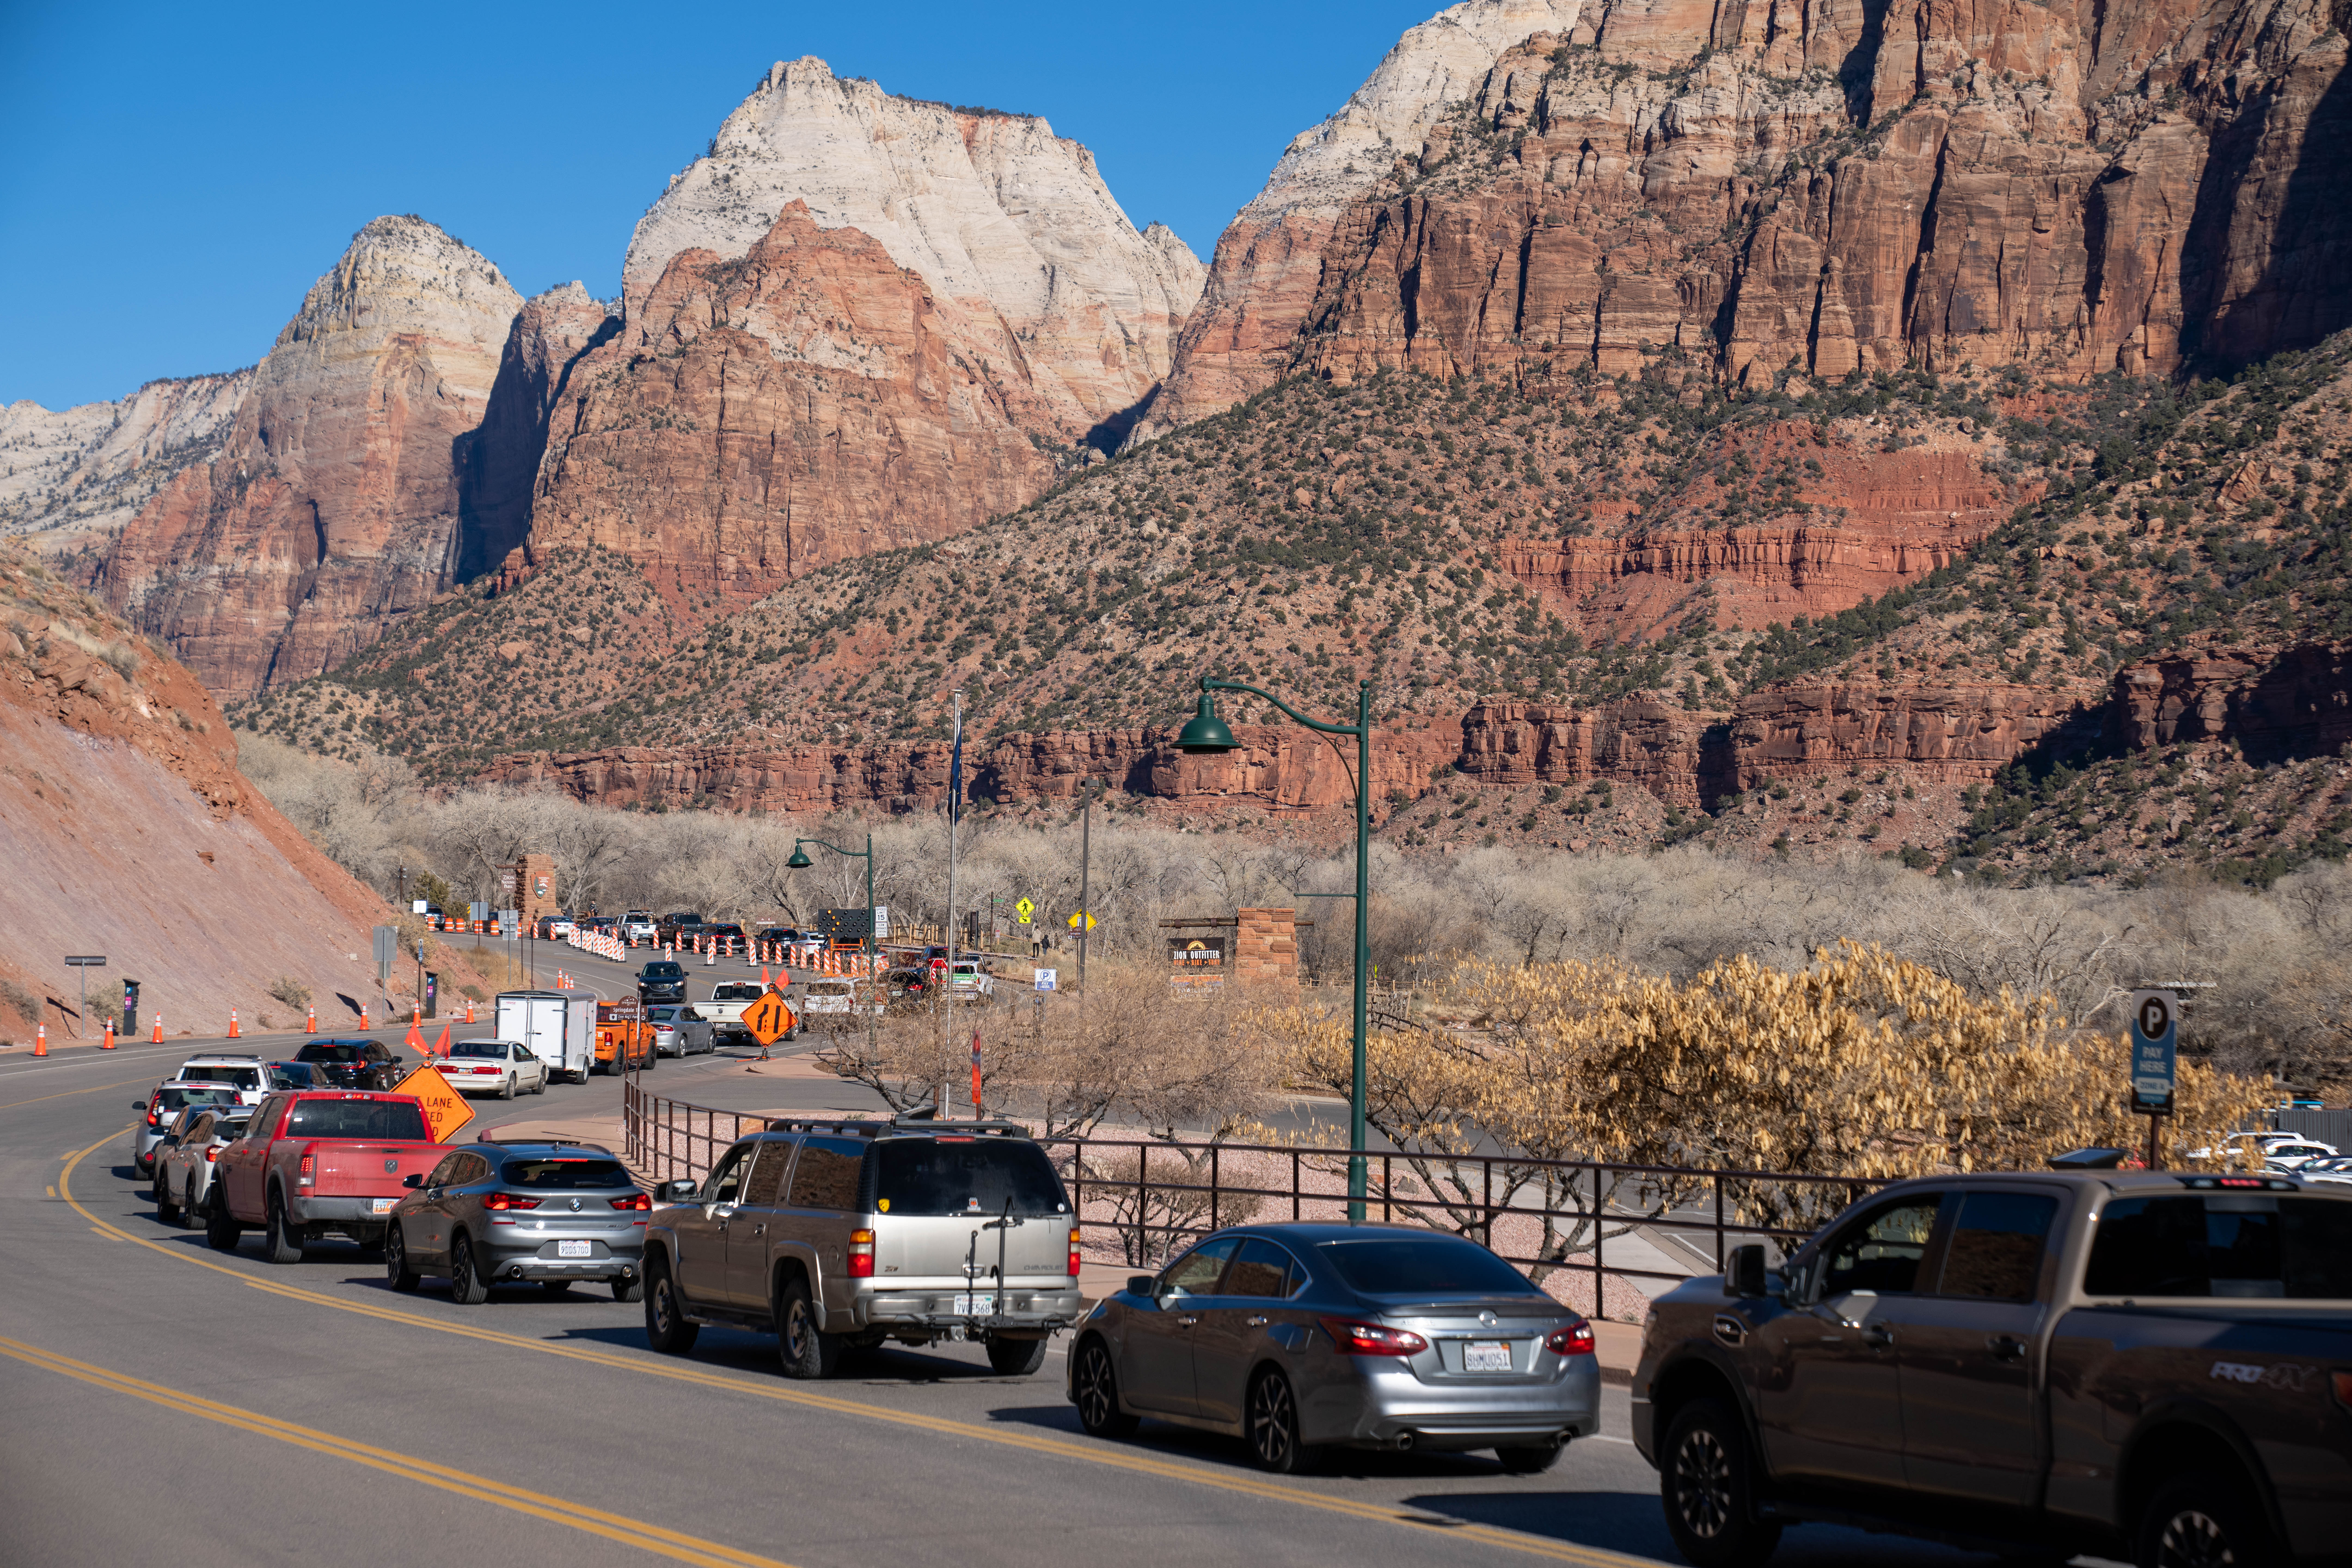 Cars lined up on the road to enter the South Entrance of Zion National Park